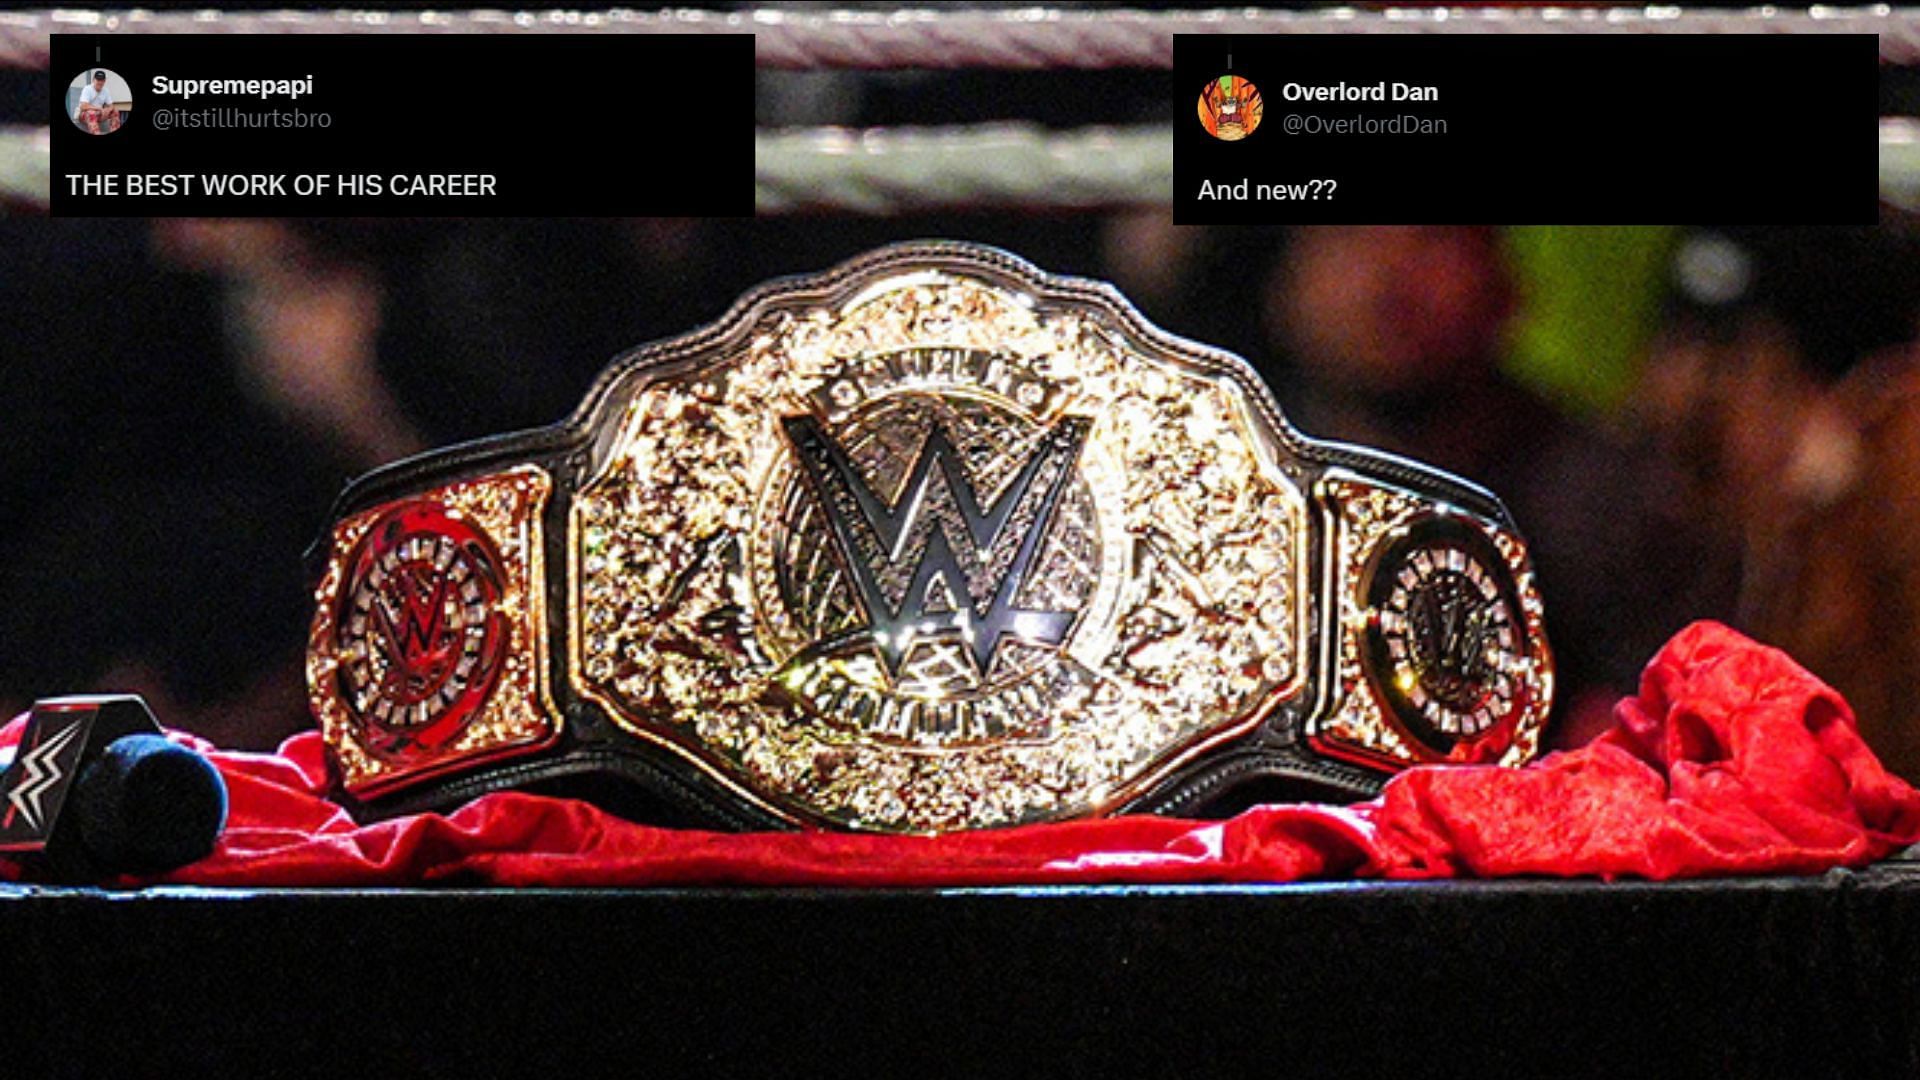 The World Heavyweight Championship is one of the top prizes in WWE